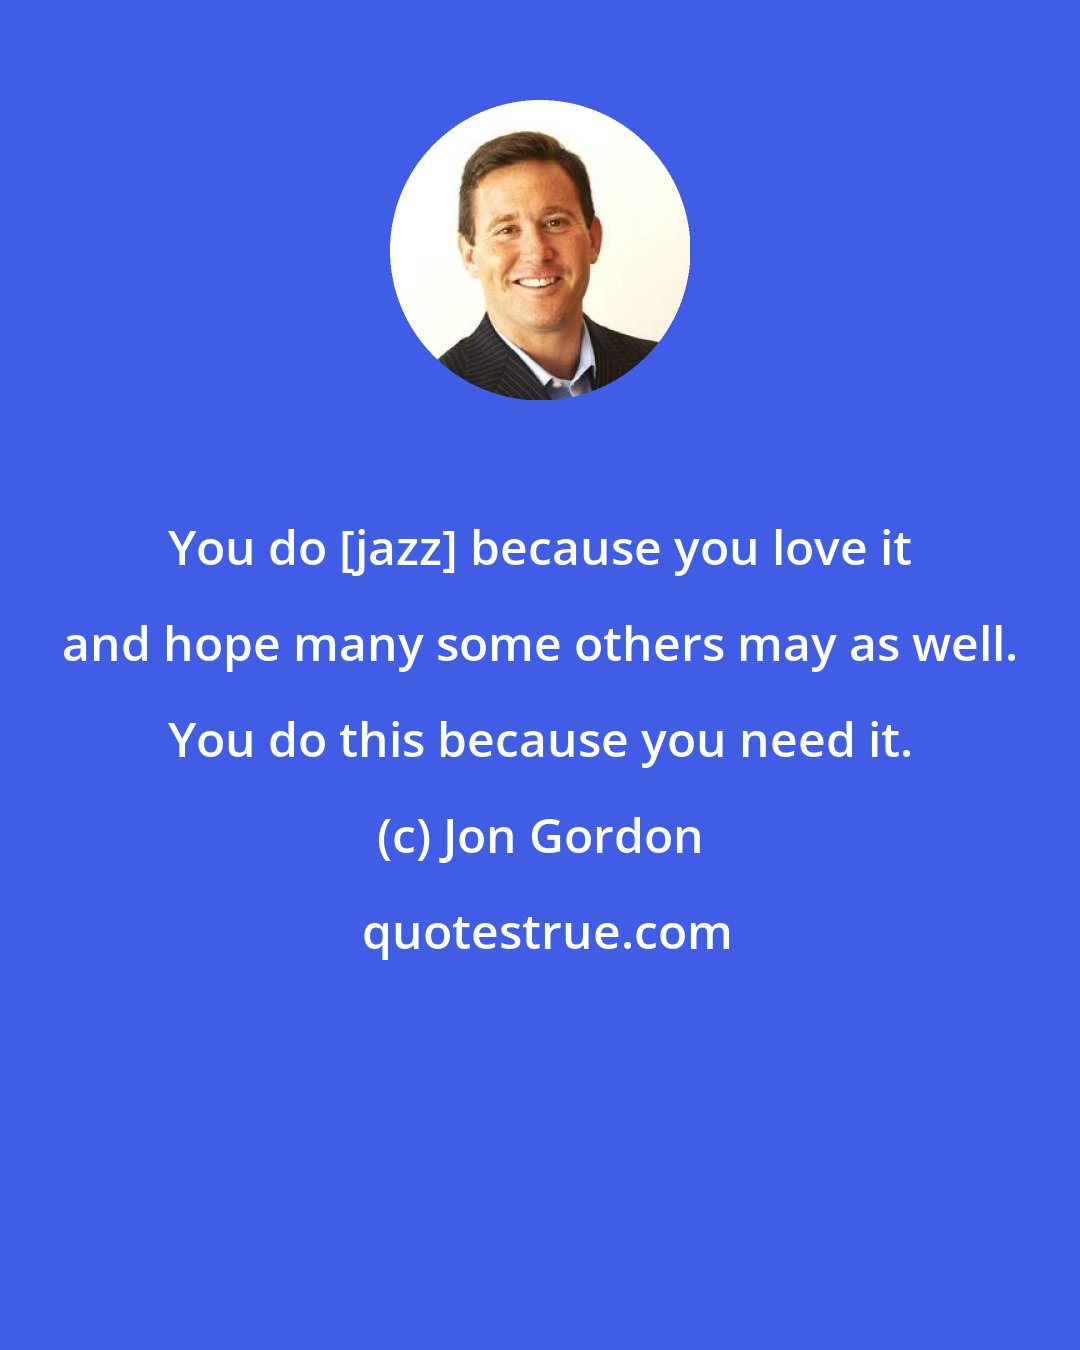 Jon Gordon: You do [jazz] because you love it and hope many some others may as well. You do this because you need it.